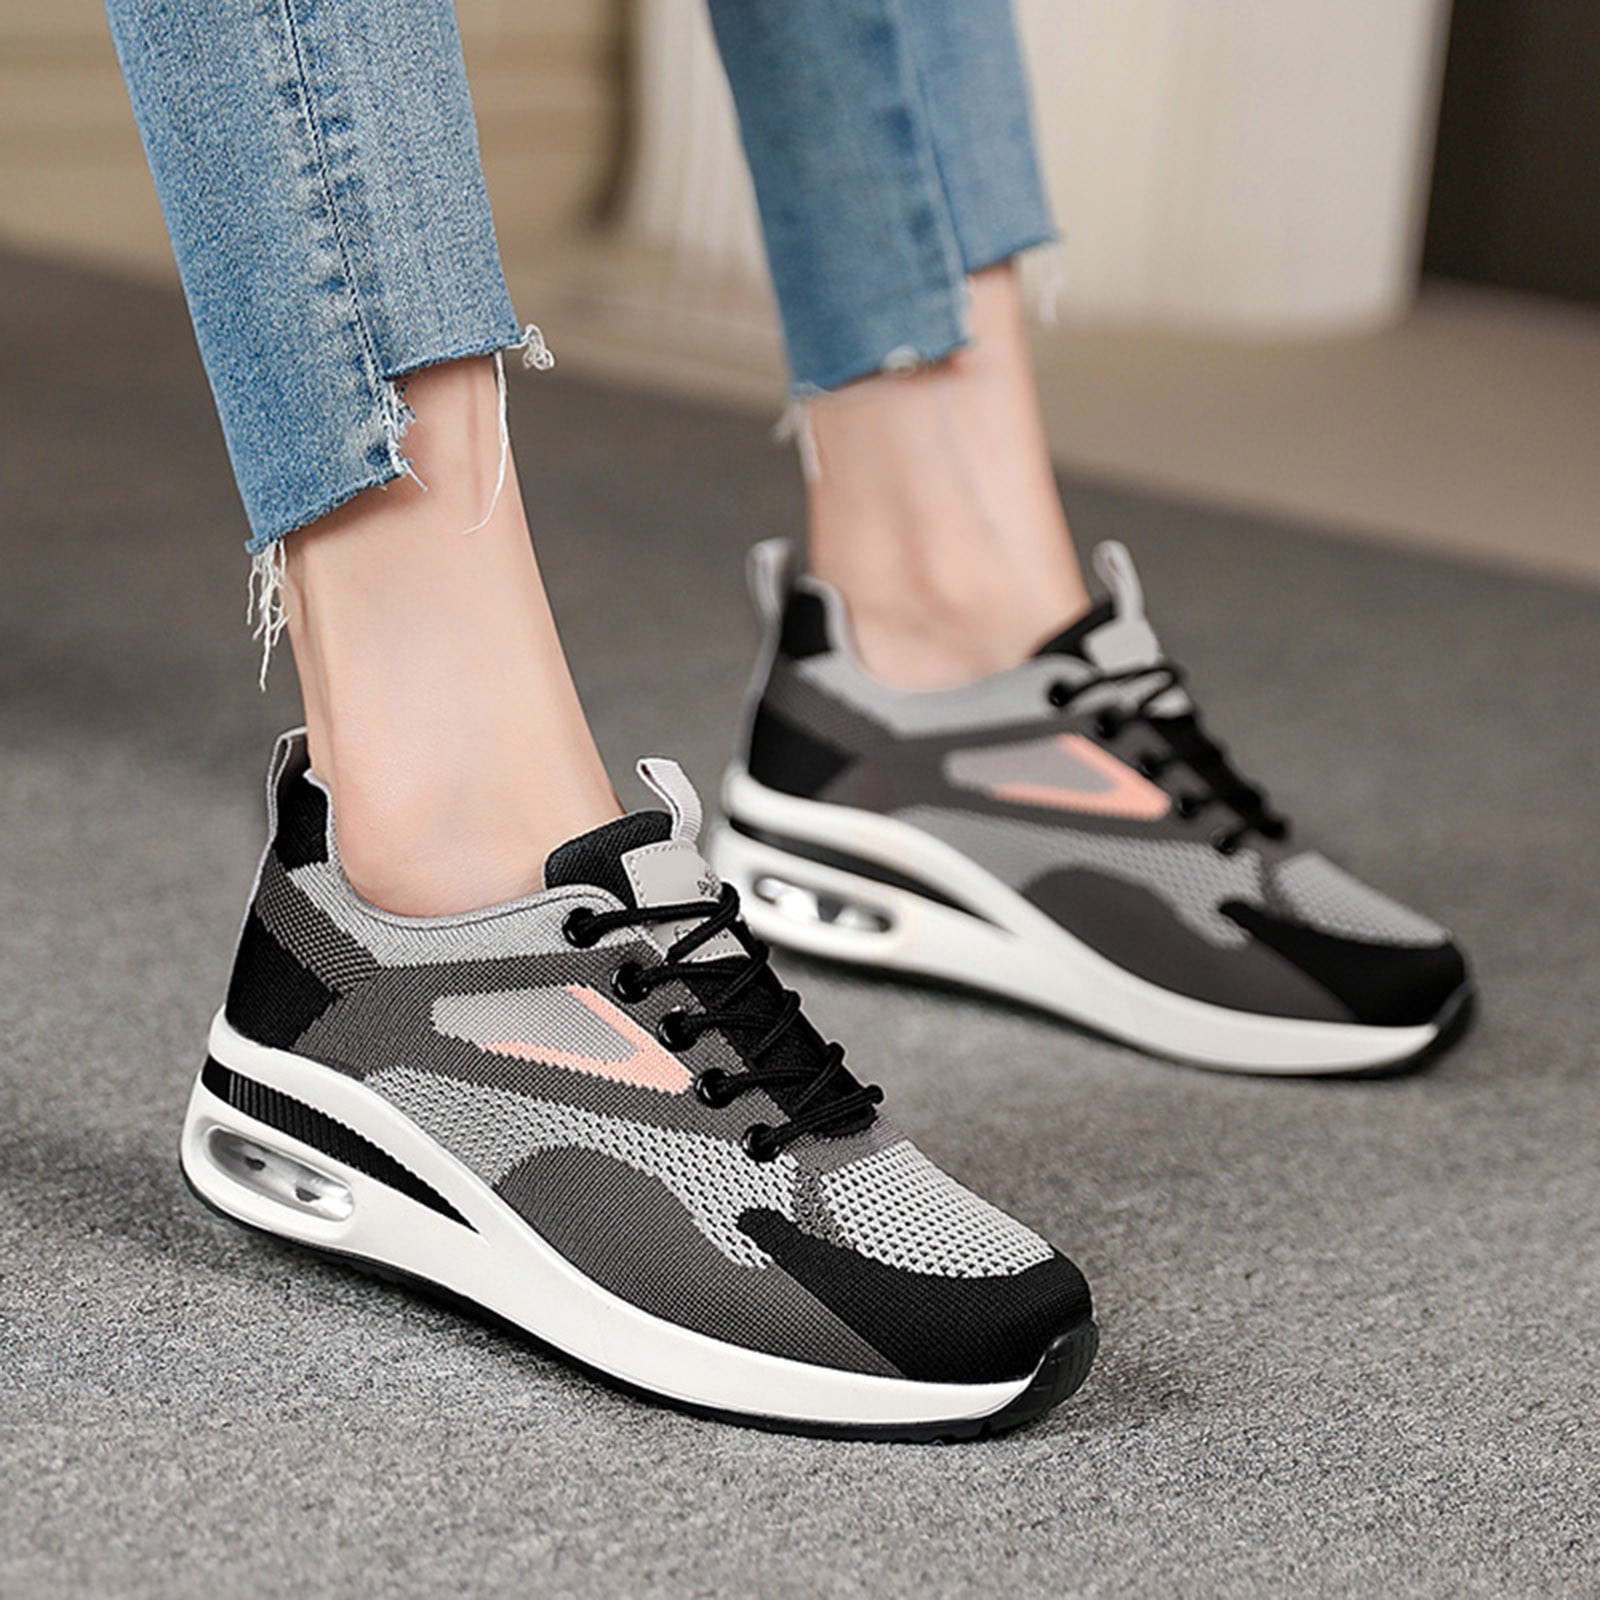 Ladies Shoes Lace Up Flat Breathable Thick Bottom Mesh Casual Running Shoes  Sport Shoes Sneakers Women Size 8 Sneakers Women Shoes Womens Low Top Sneakers  Womens Sneakers Size 8 Women Canvas Sneakers 